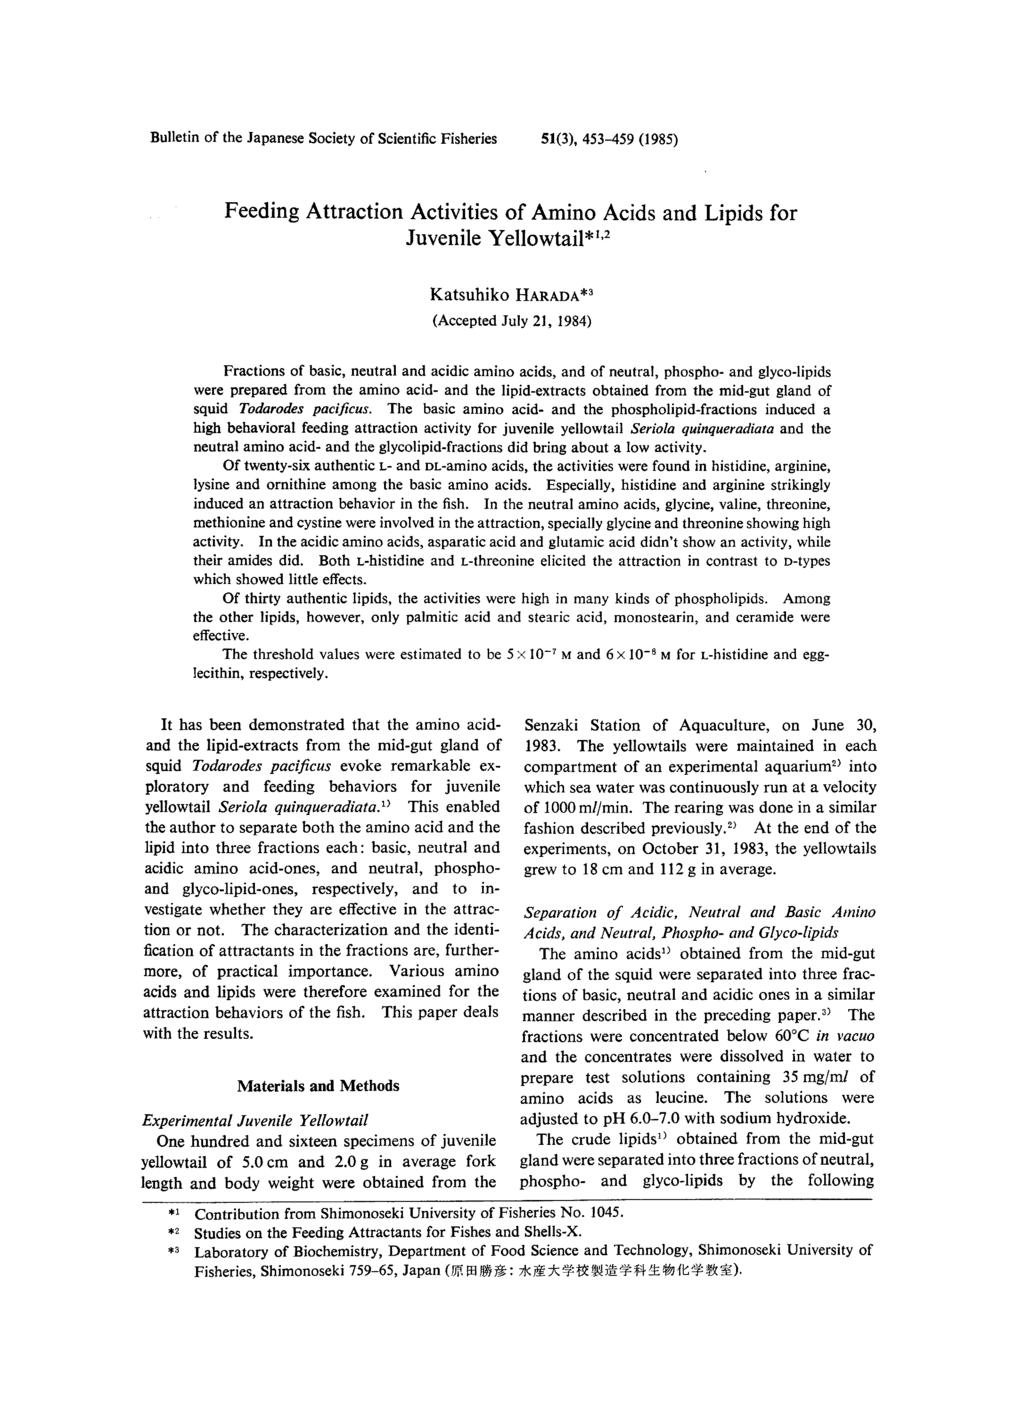 Bulletin of the Japanese Society of Scientific Fisheries 51(3), 453-459 (1985) Feeding Attraction Activities of Amino Acids and Lipids for Juvenile Yellowtail*1, 2 Katsuhiko HARADA*3 (Accepted July